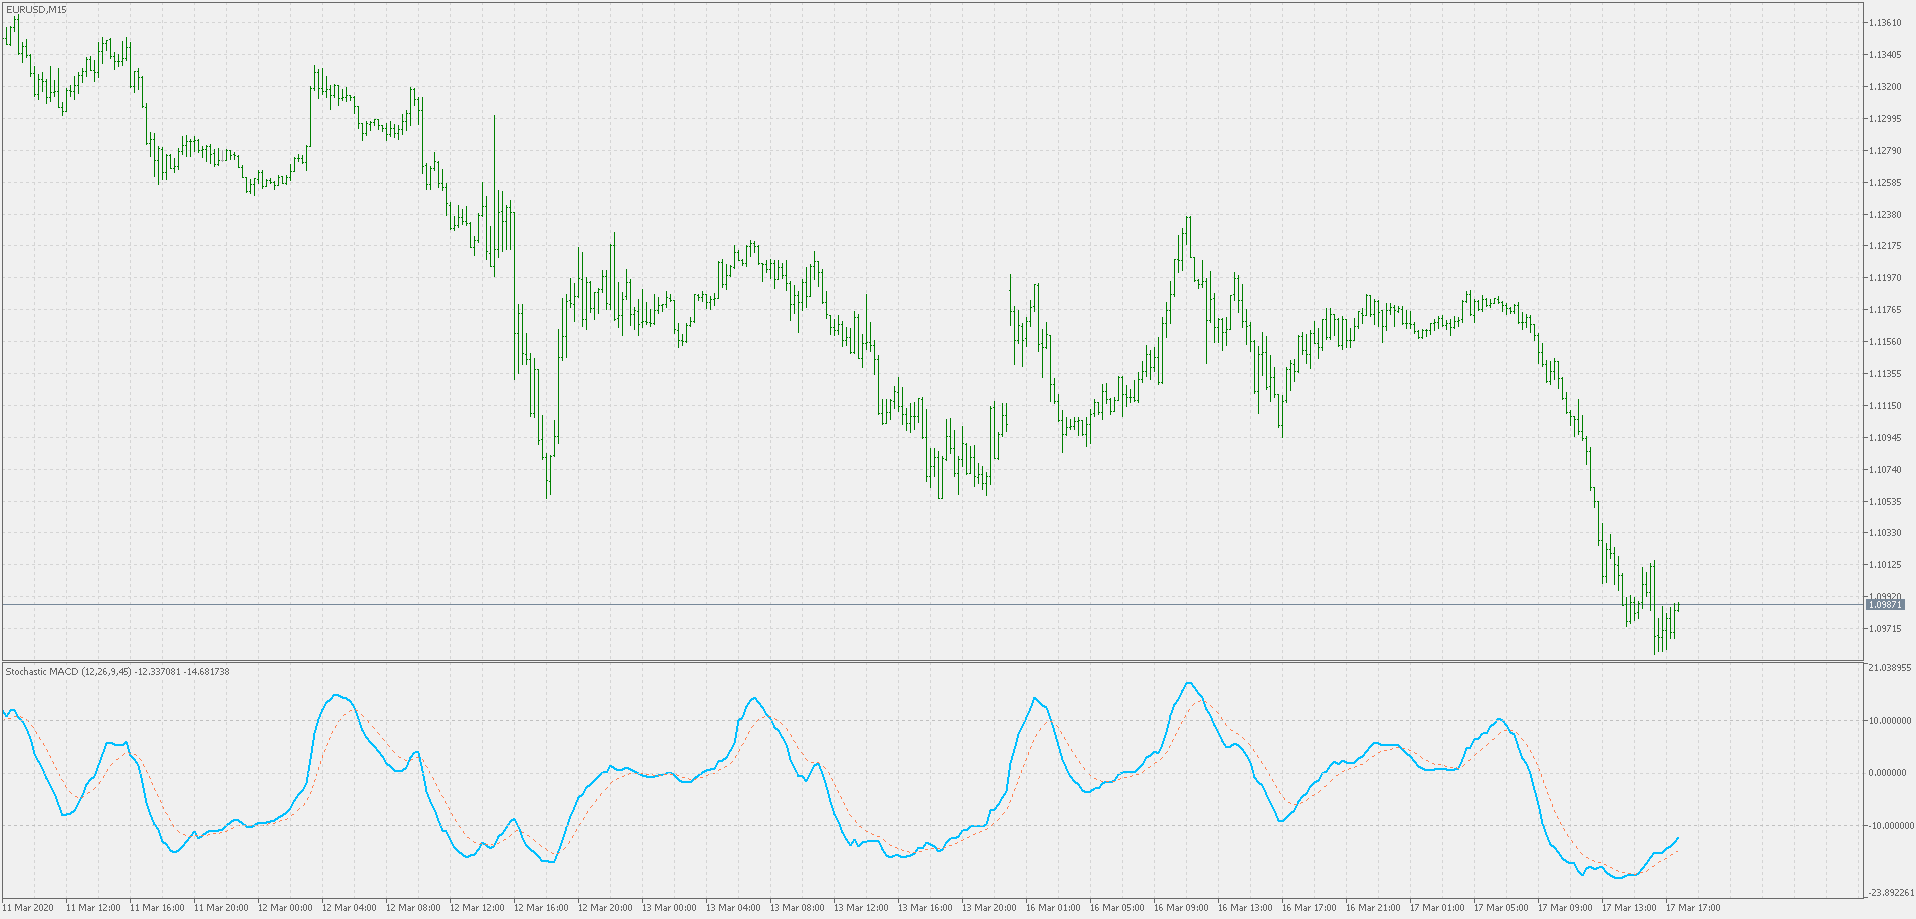 Free download of the 'Stochastic MACD' indicator by ...